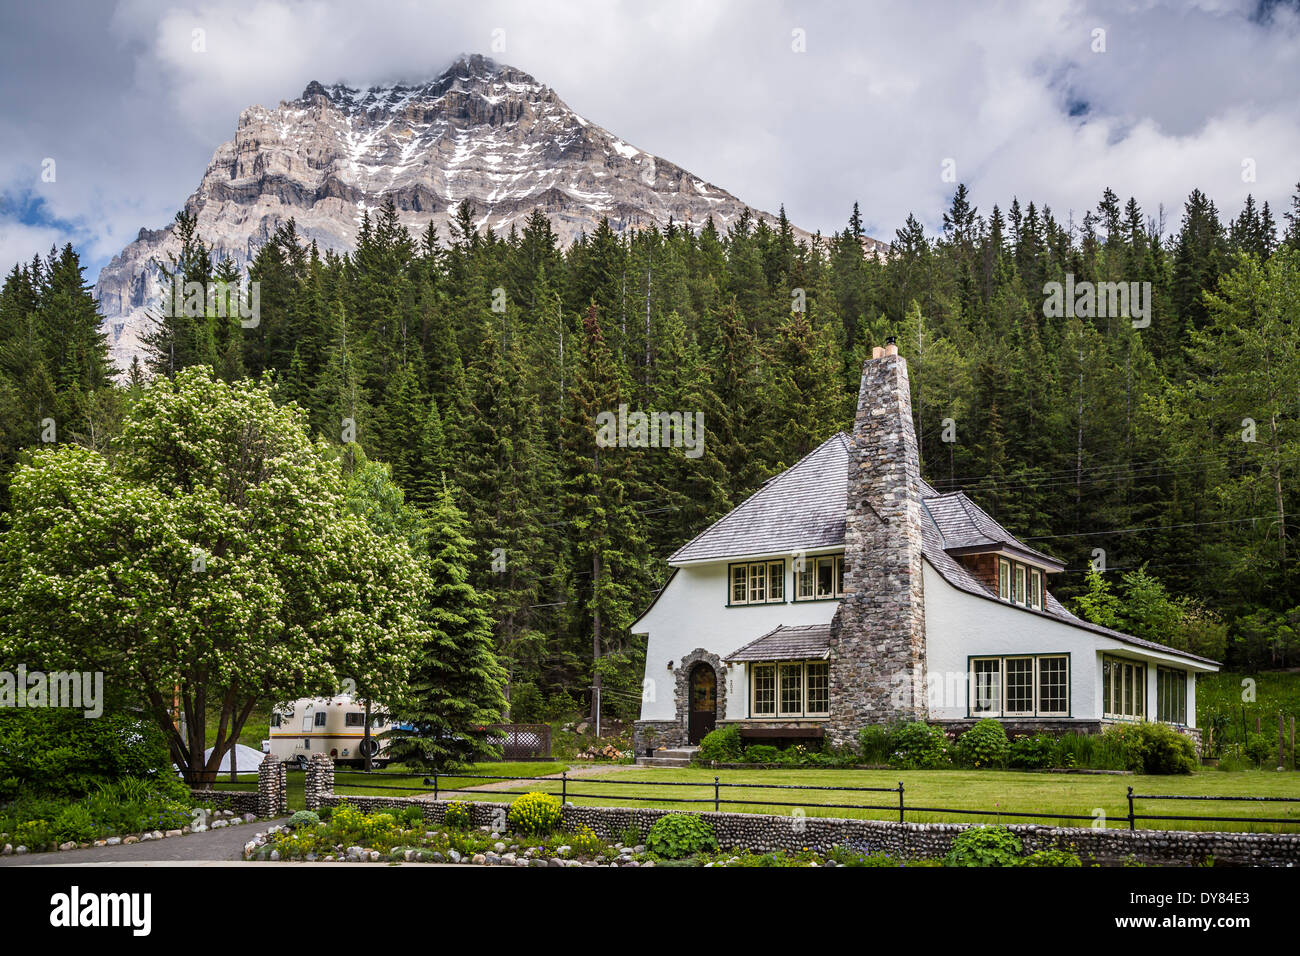 A home in the town of Field, British Columbia, Canada. Stock Photo